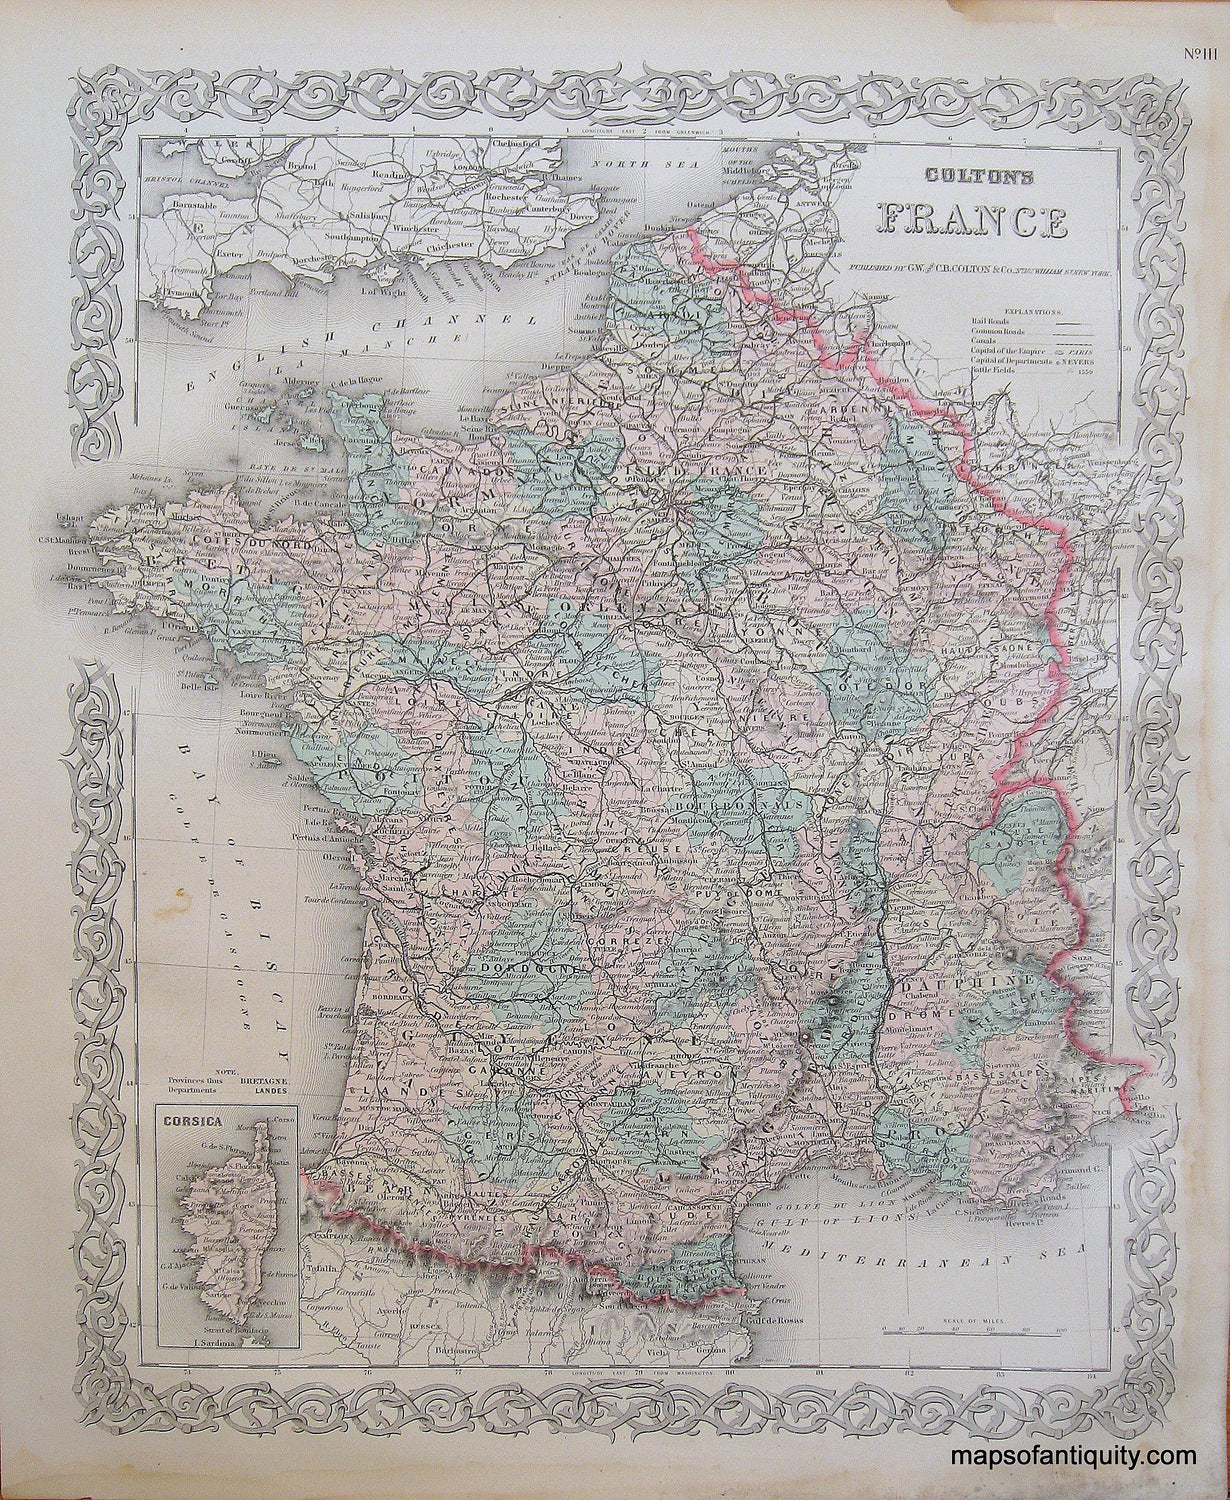 Antique-Hand-Colored-Map-Colton's-France-Europe-France-1887-Colton-Maps-Of-Antiquity